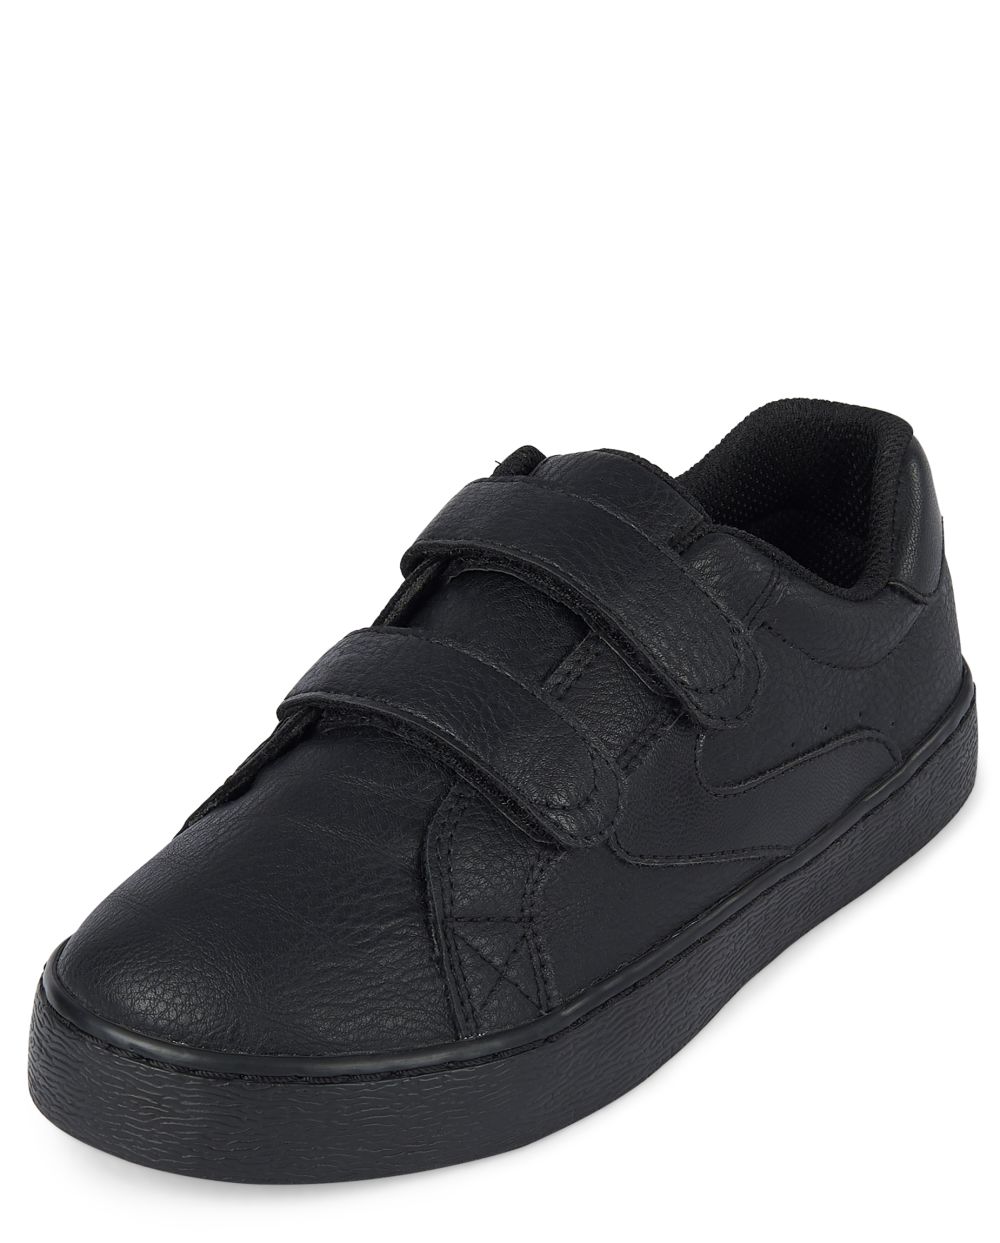 The Children's Place Boys Uniform Low Top Sneakers - Black - Youth 2